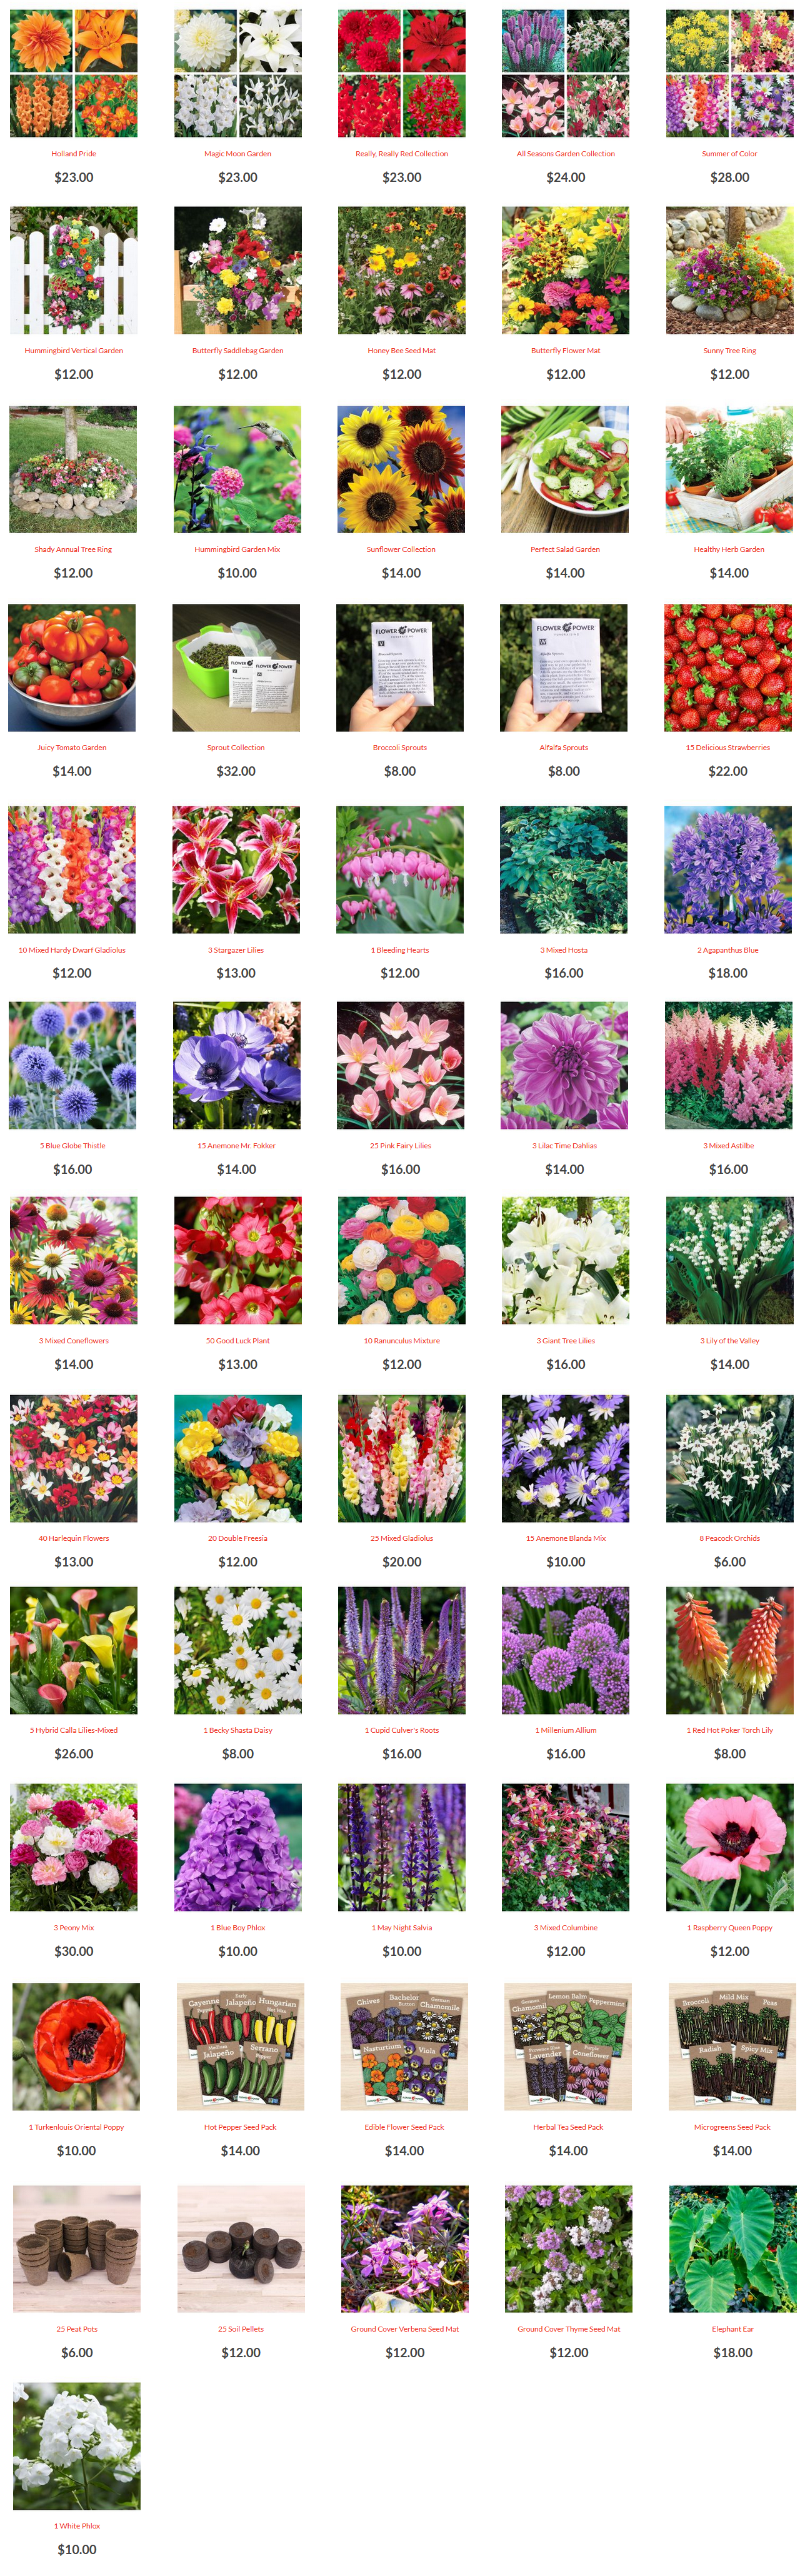 Spring Flowers Online Store Products